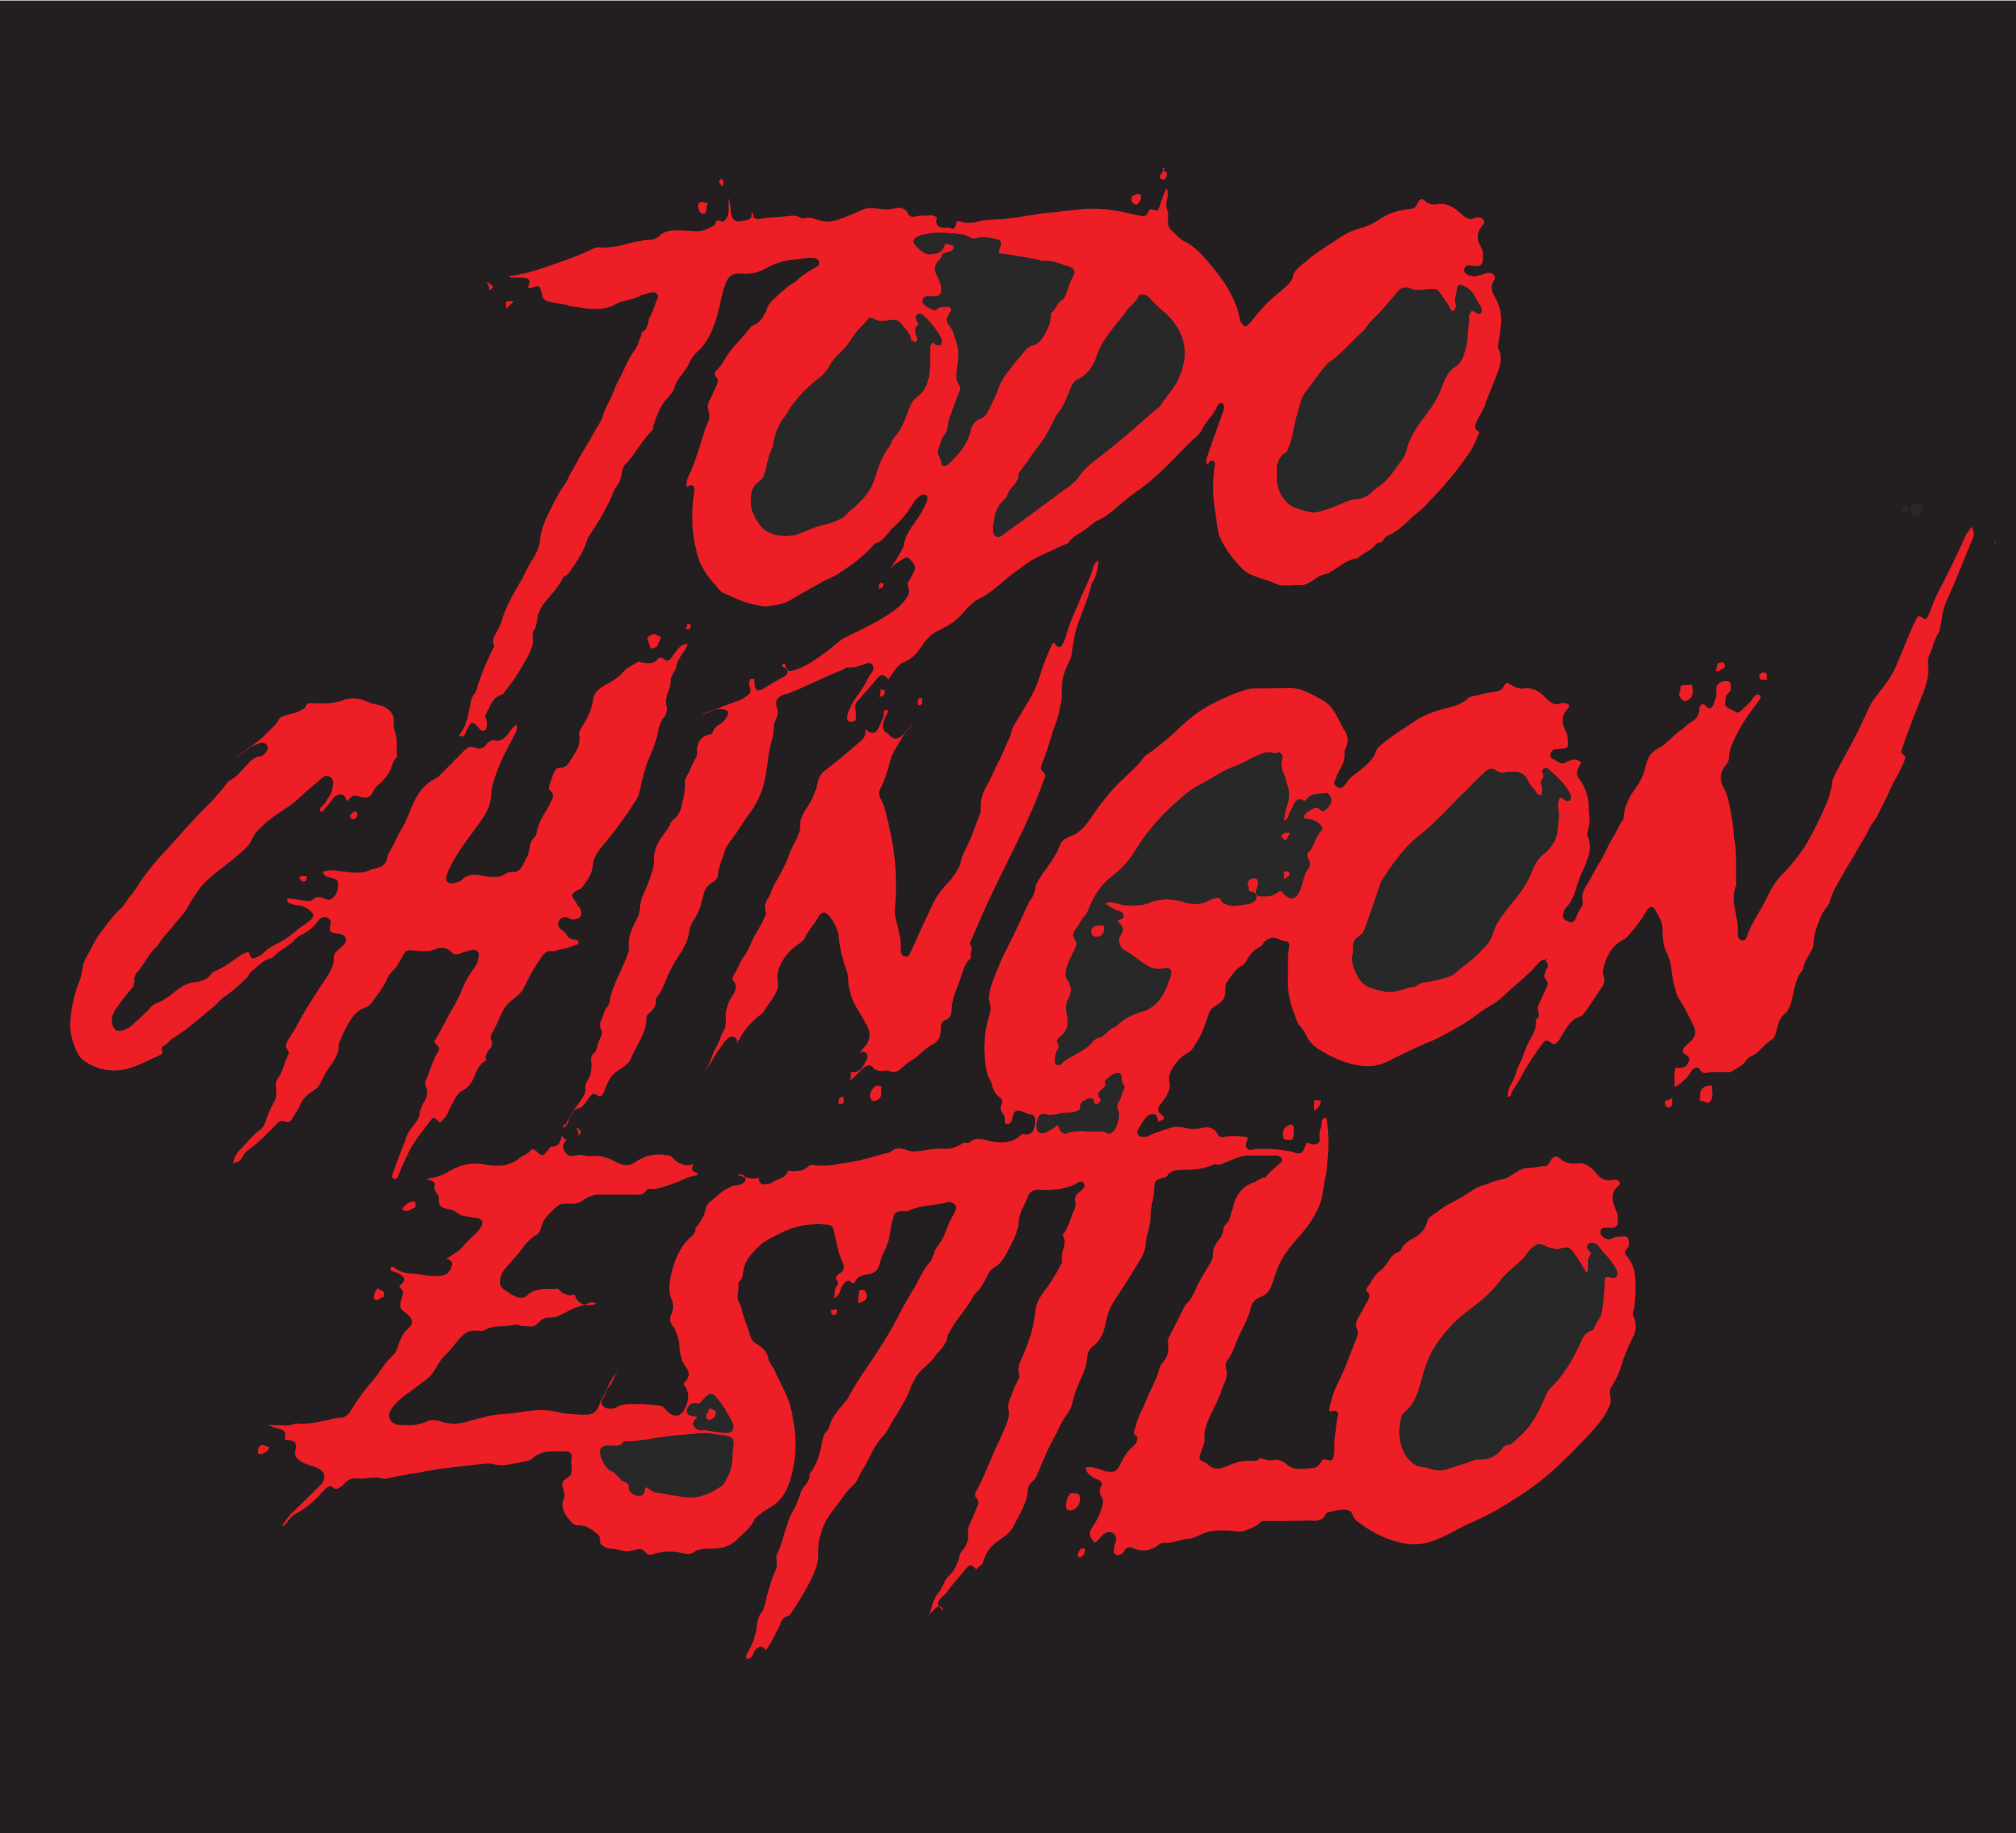 red graphic text on black backround reads "Todo Chingon Etilo" which is "Total Badass Style" in English